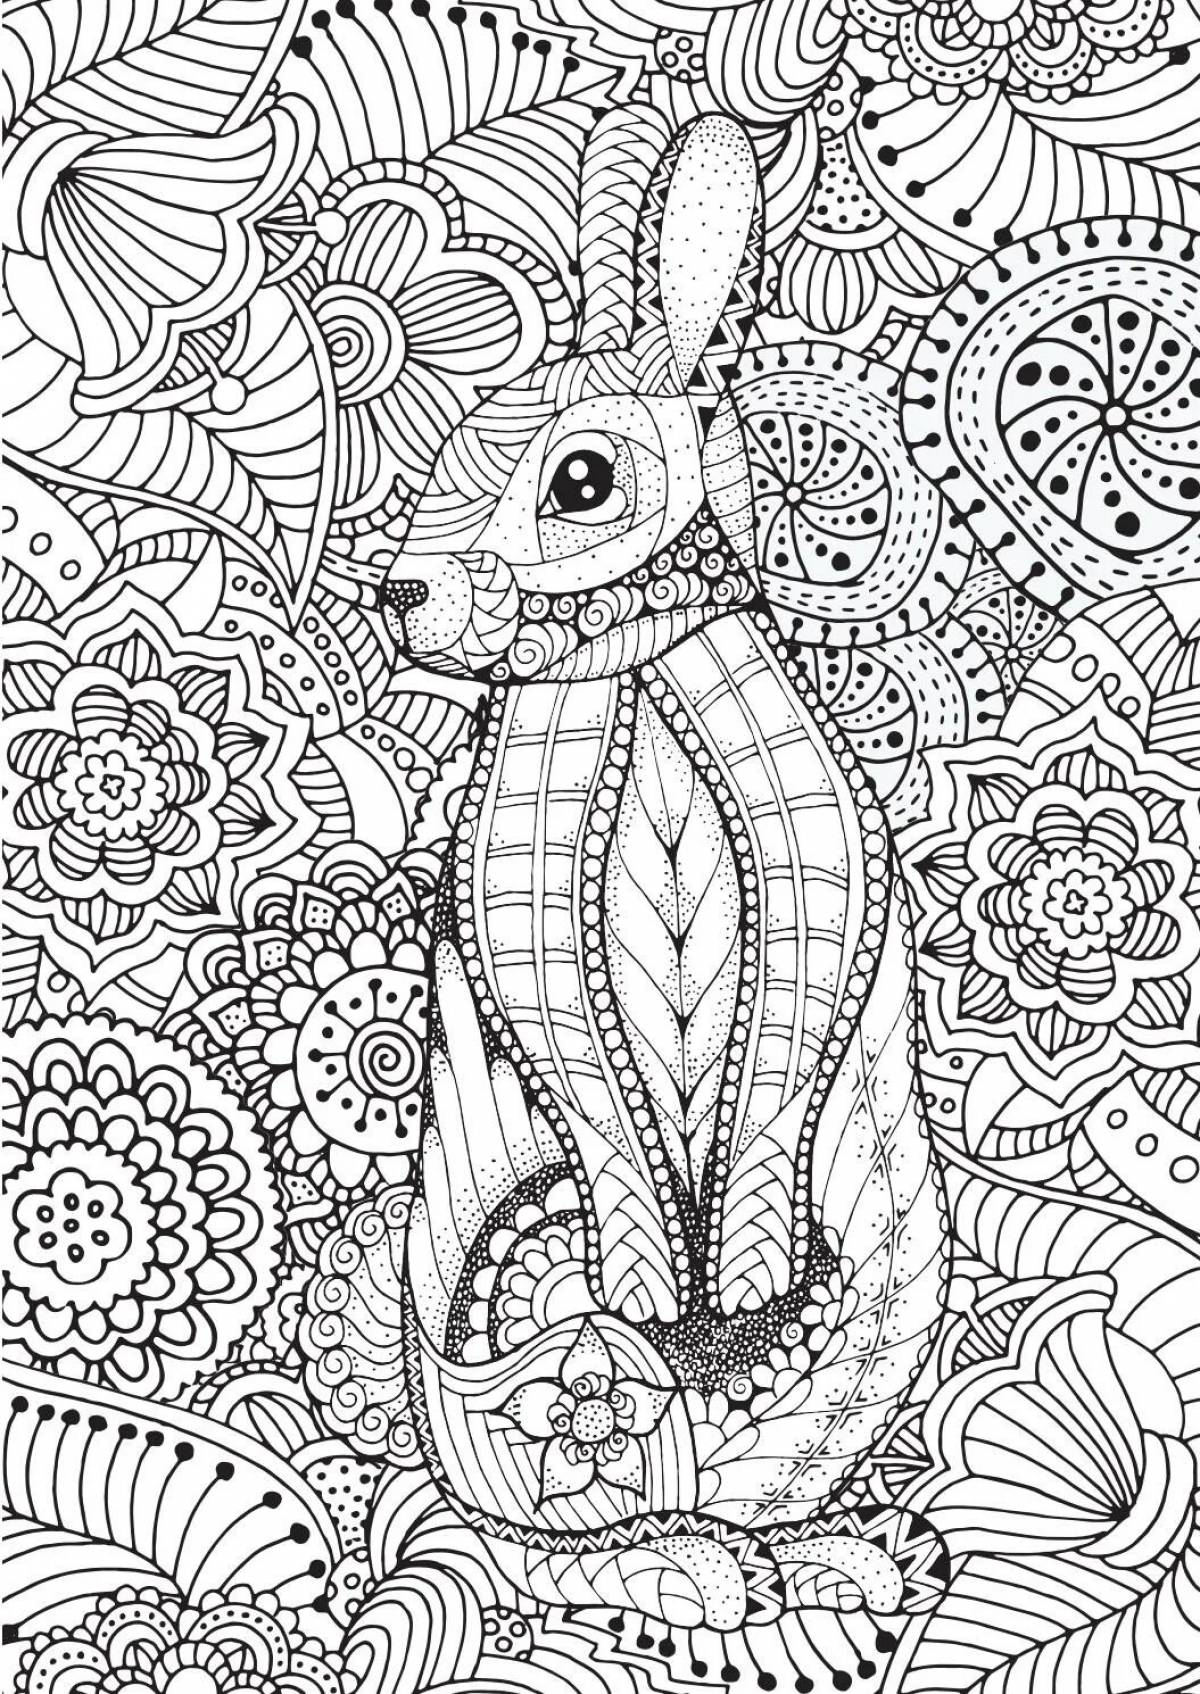 Touching coloring simple pencil antistress coloring page